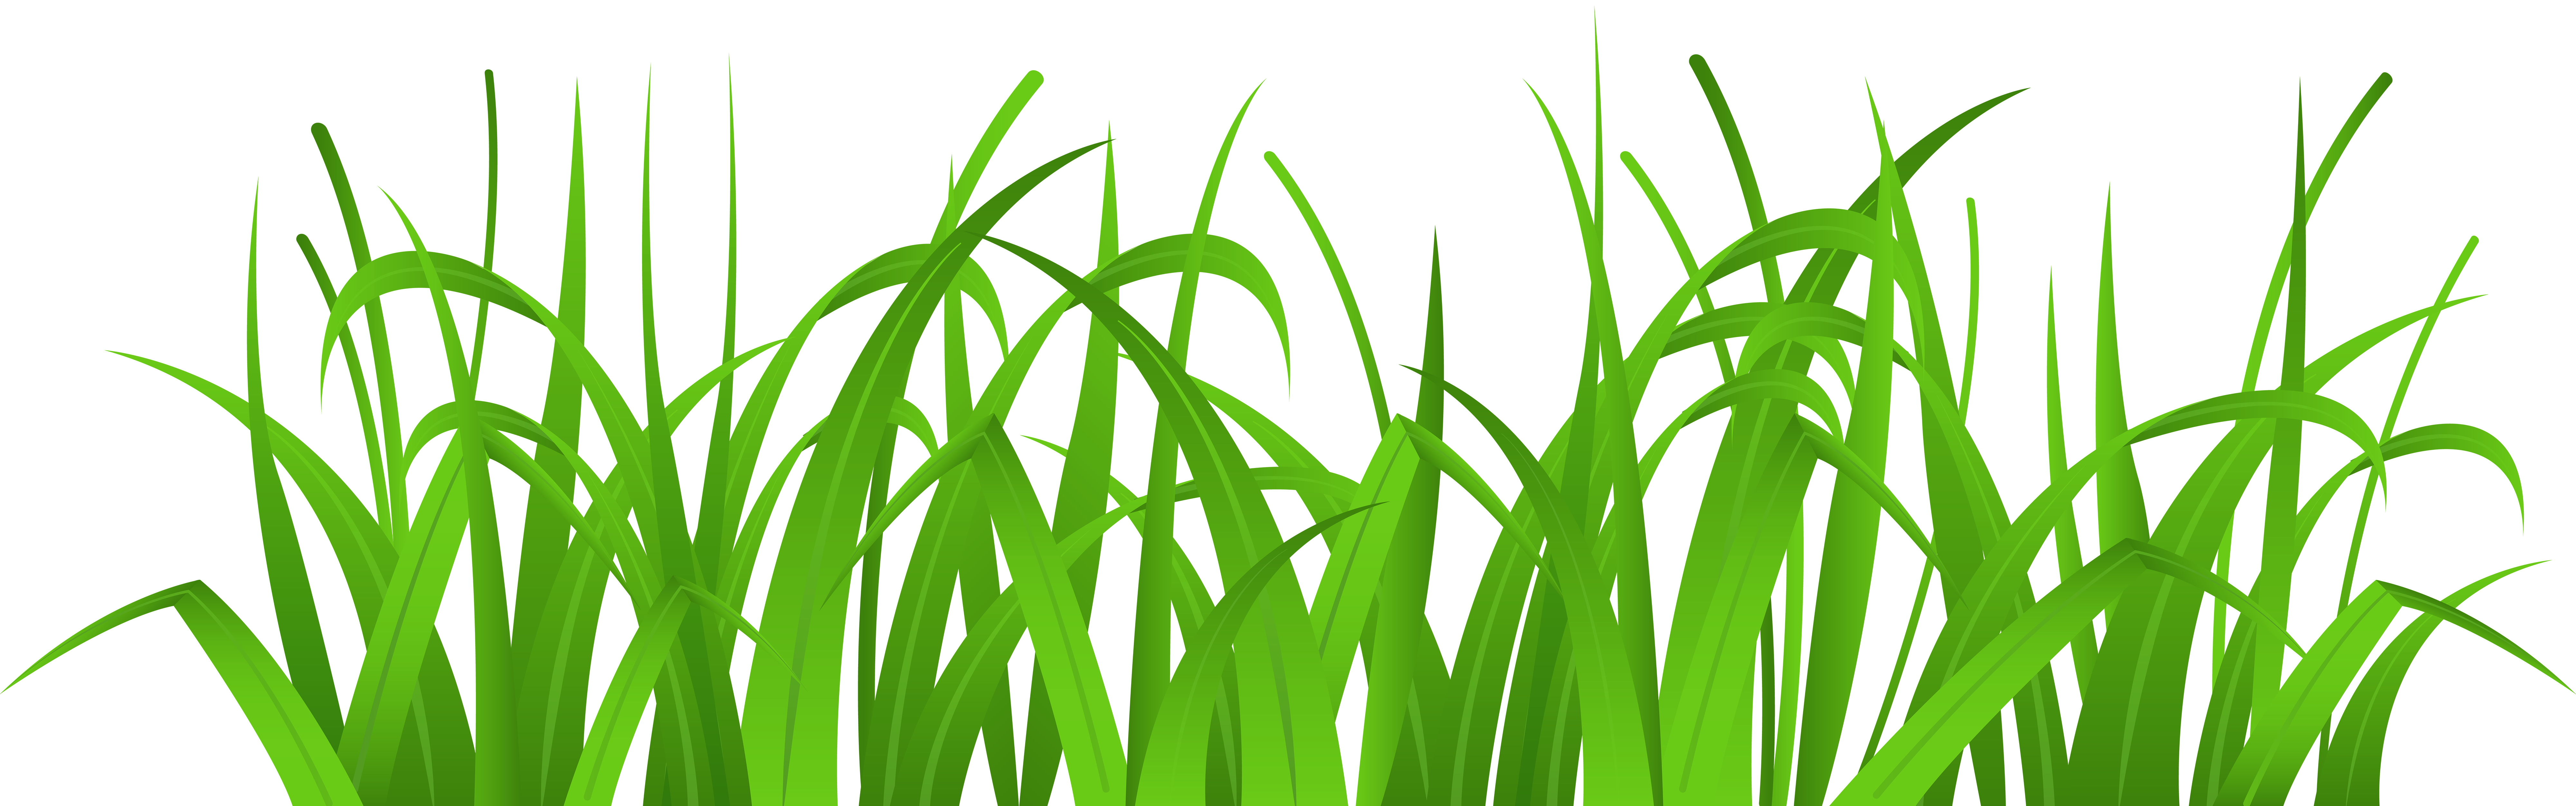 Grass png images